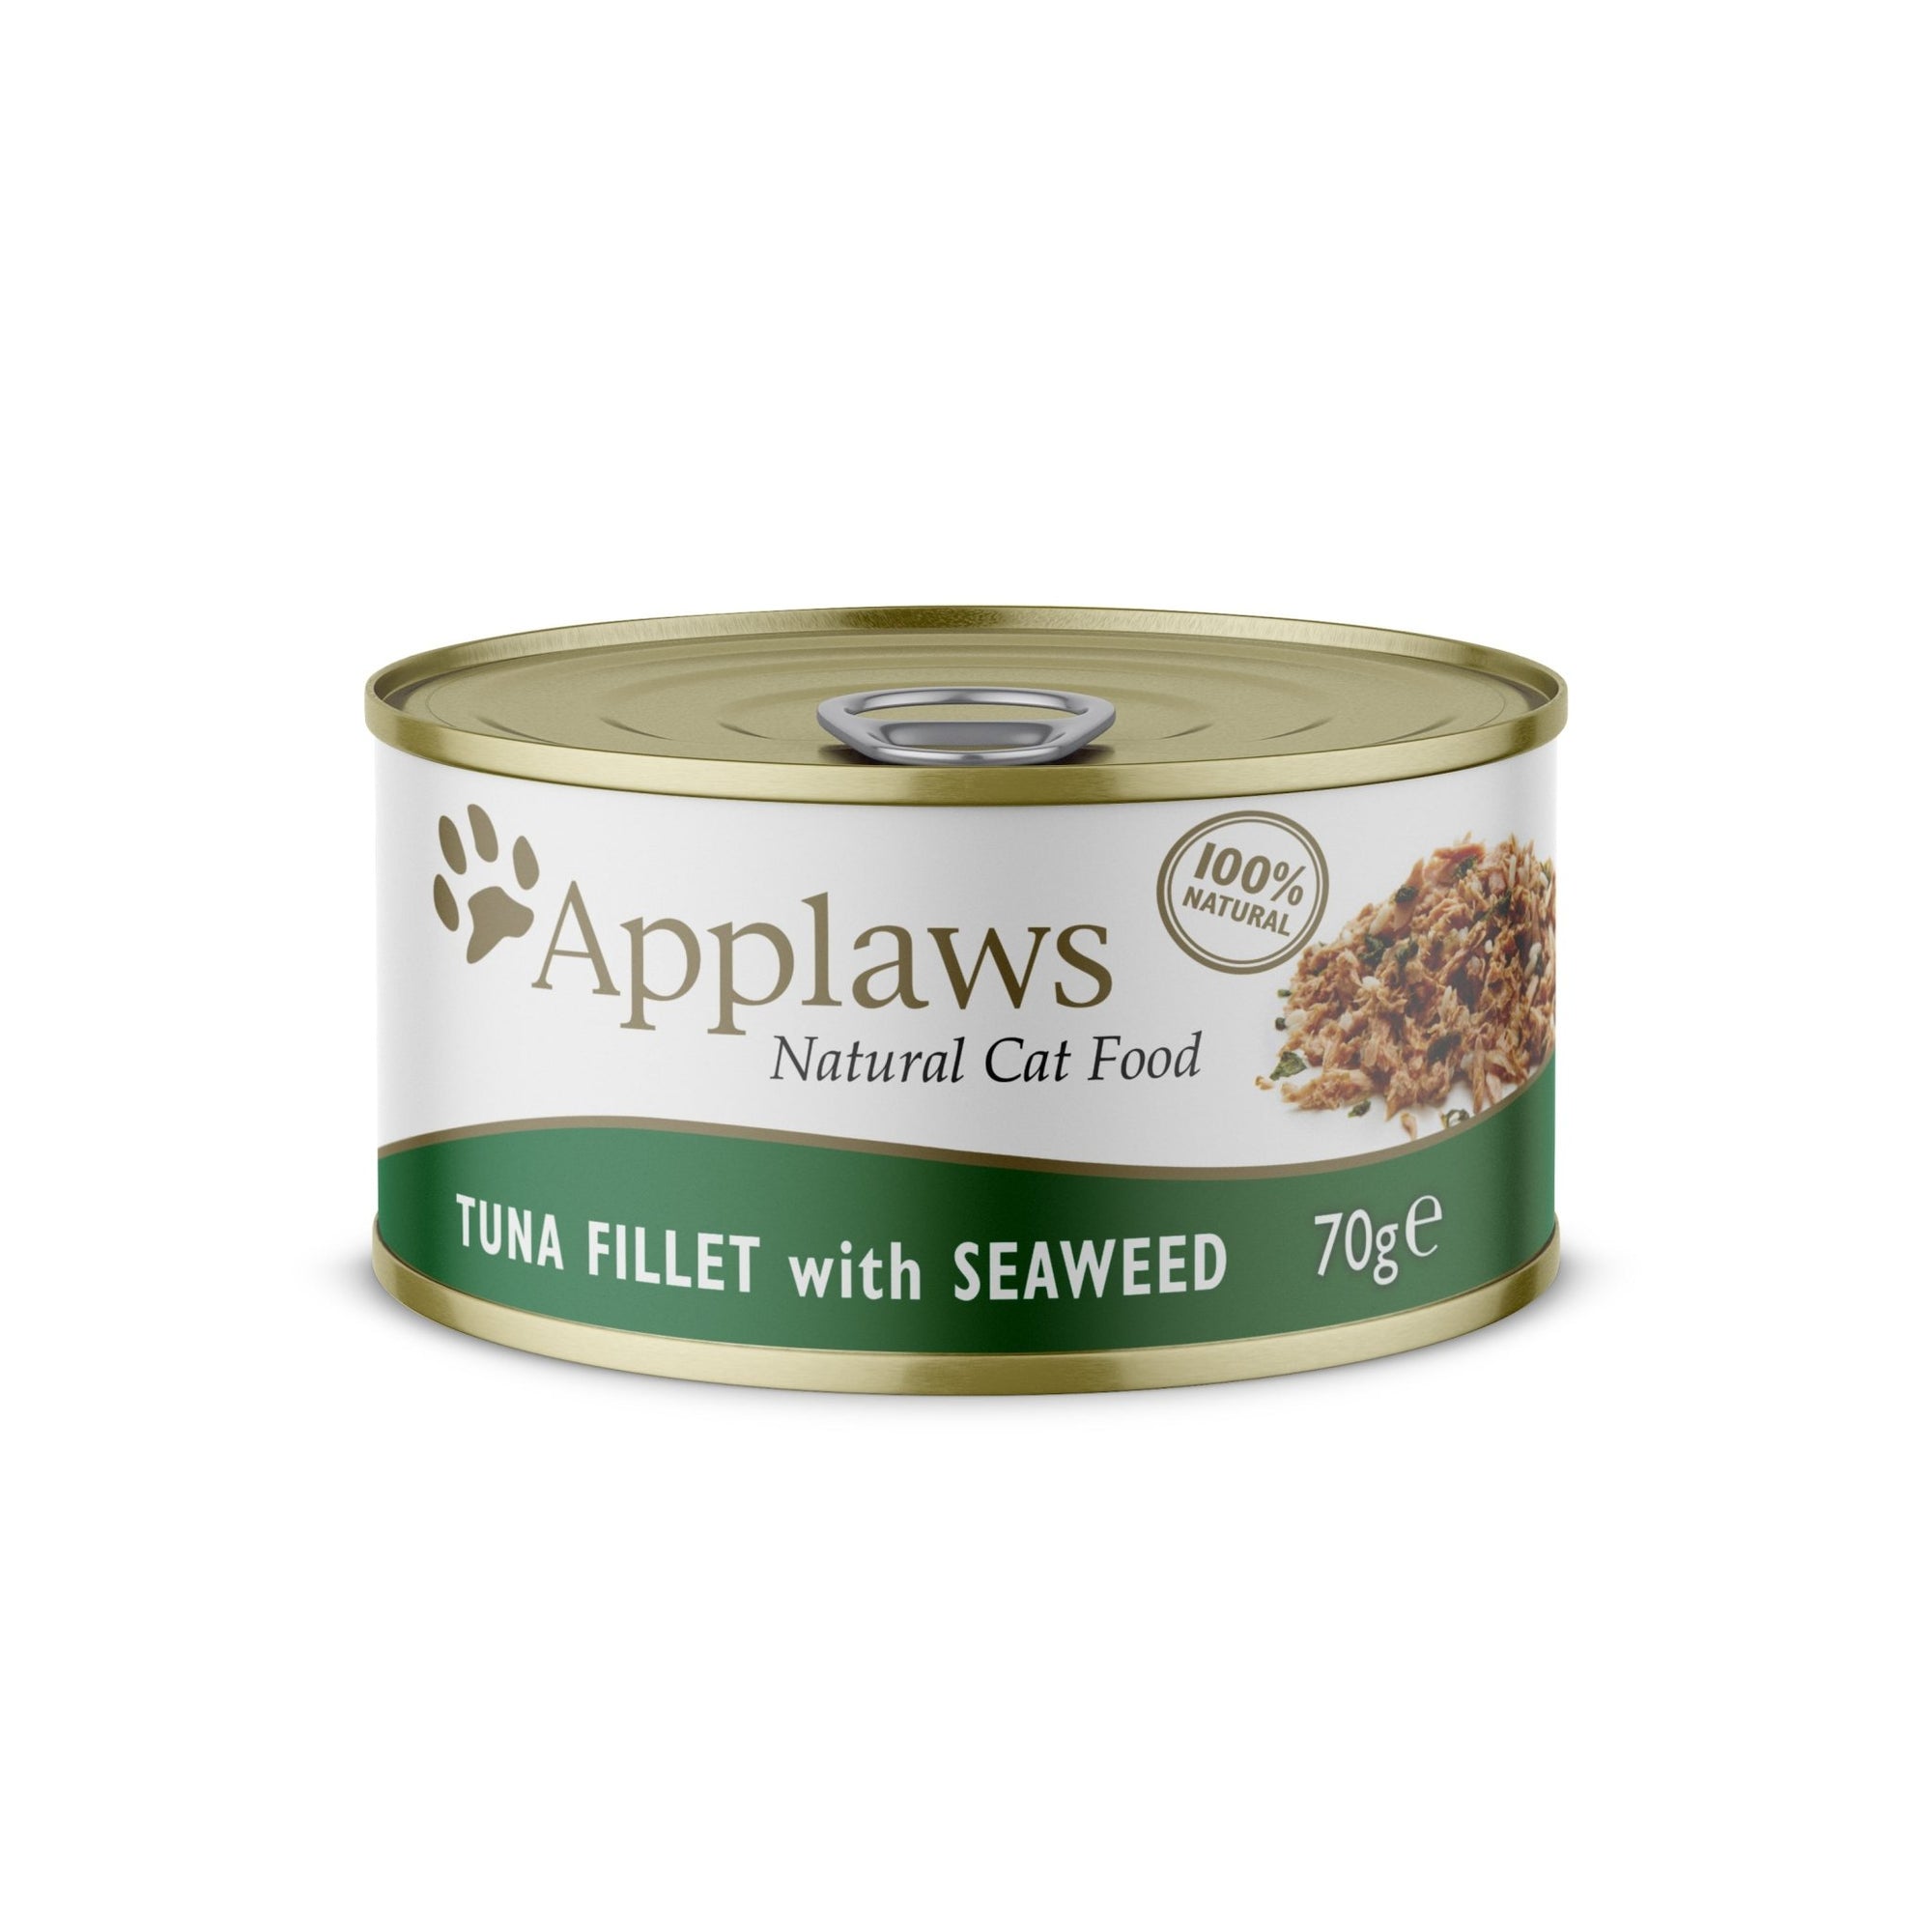 Applaws Cat Tuna Fillet with Seaweed in Broth Tins 24 x 70g, Applaws,